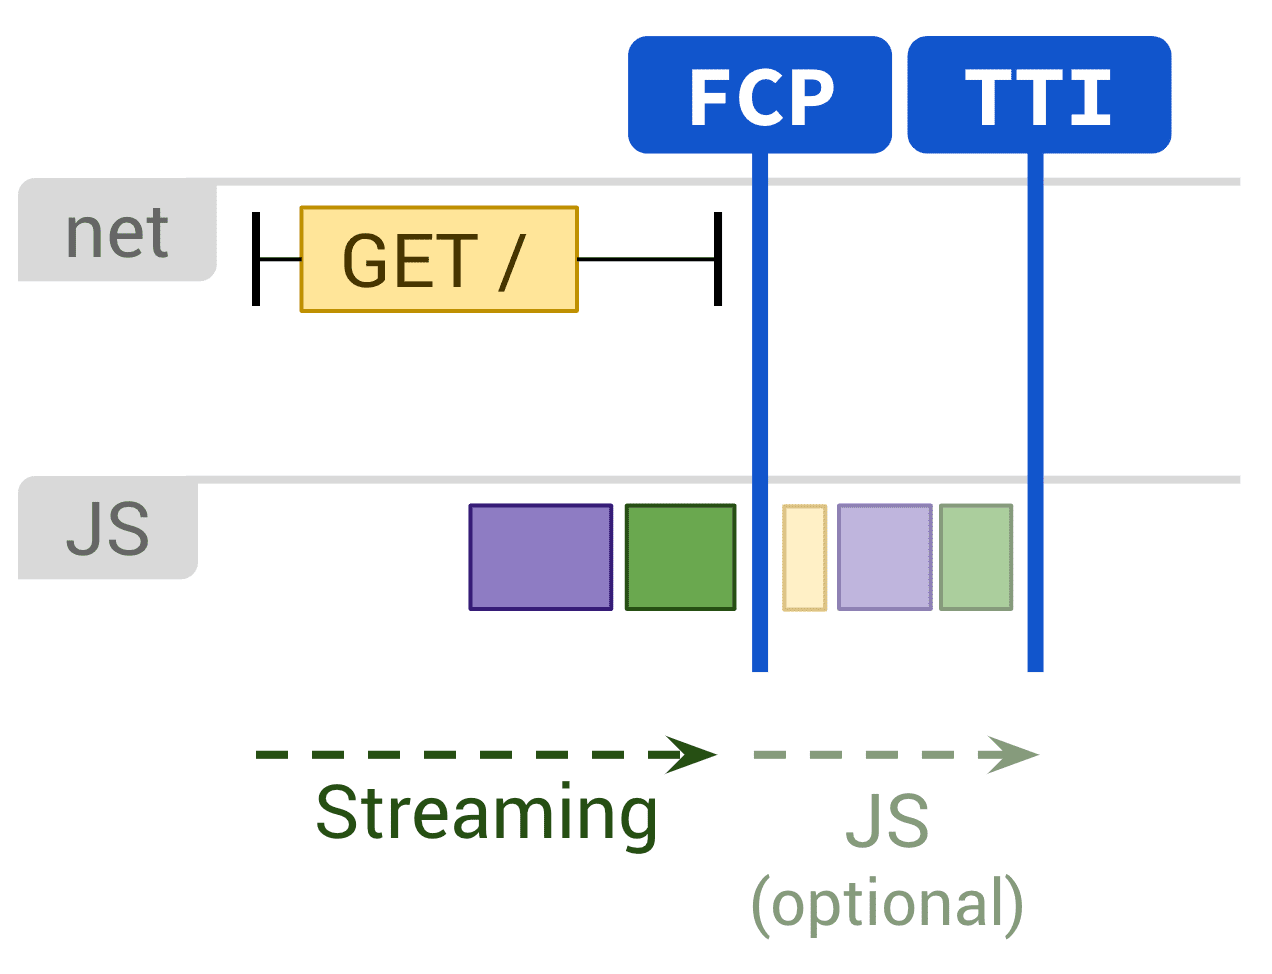 Diagram showing static rendering and optional JS execution affecting FCP and TTI.